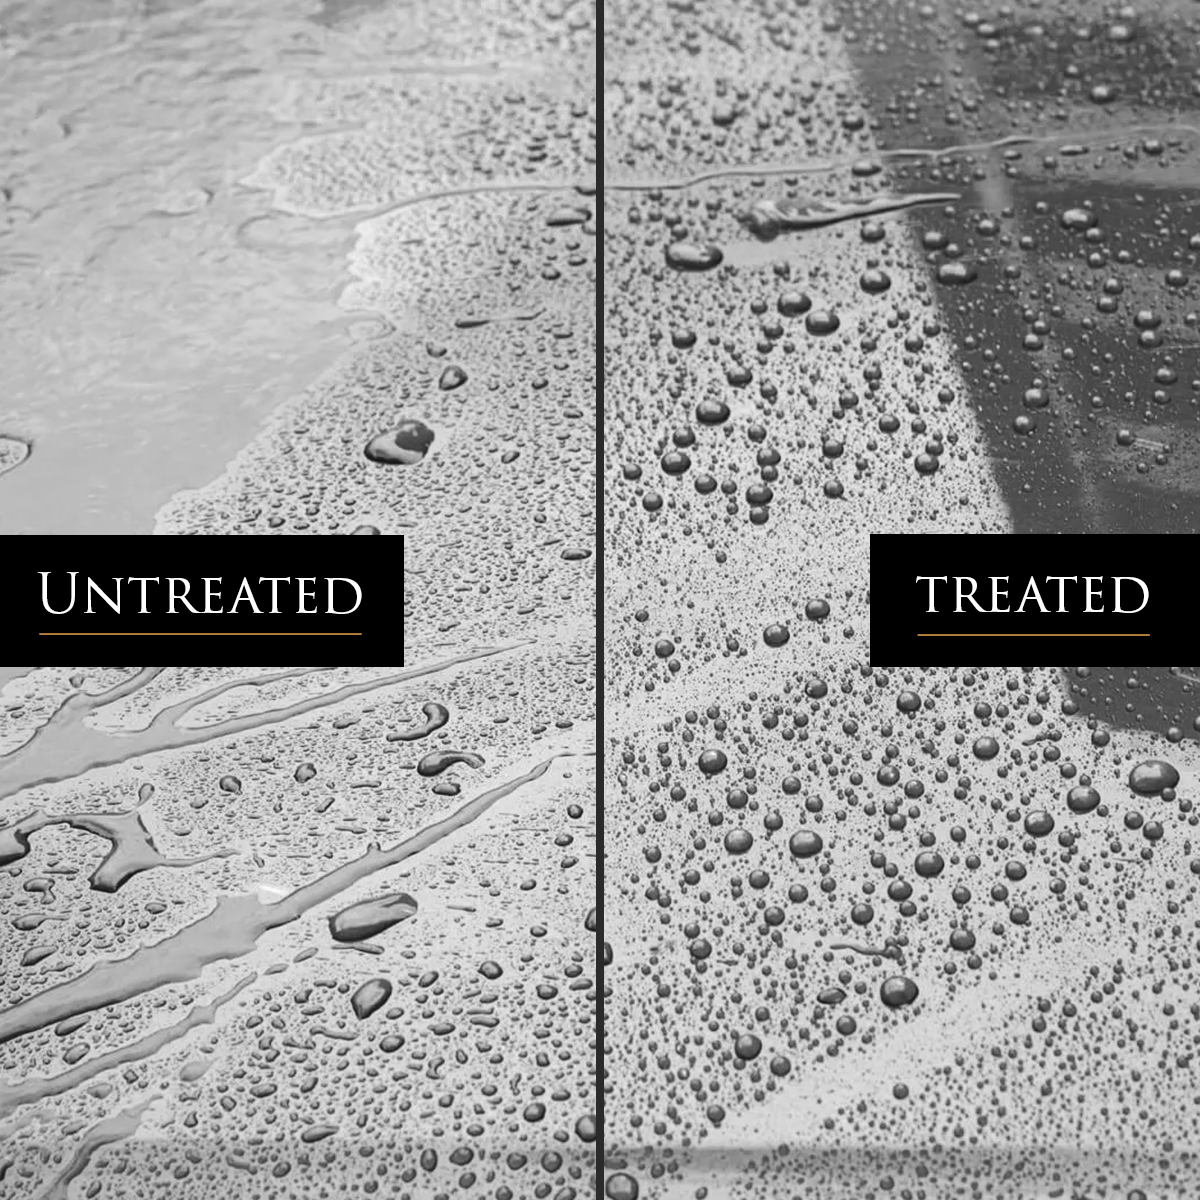 Image shows untreated vs treated car paintwork surface. Water pools on the untreated surface, water beads and runs off the treated surface.